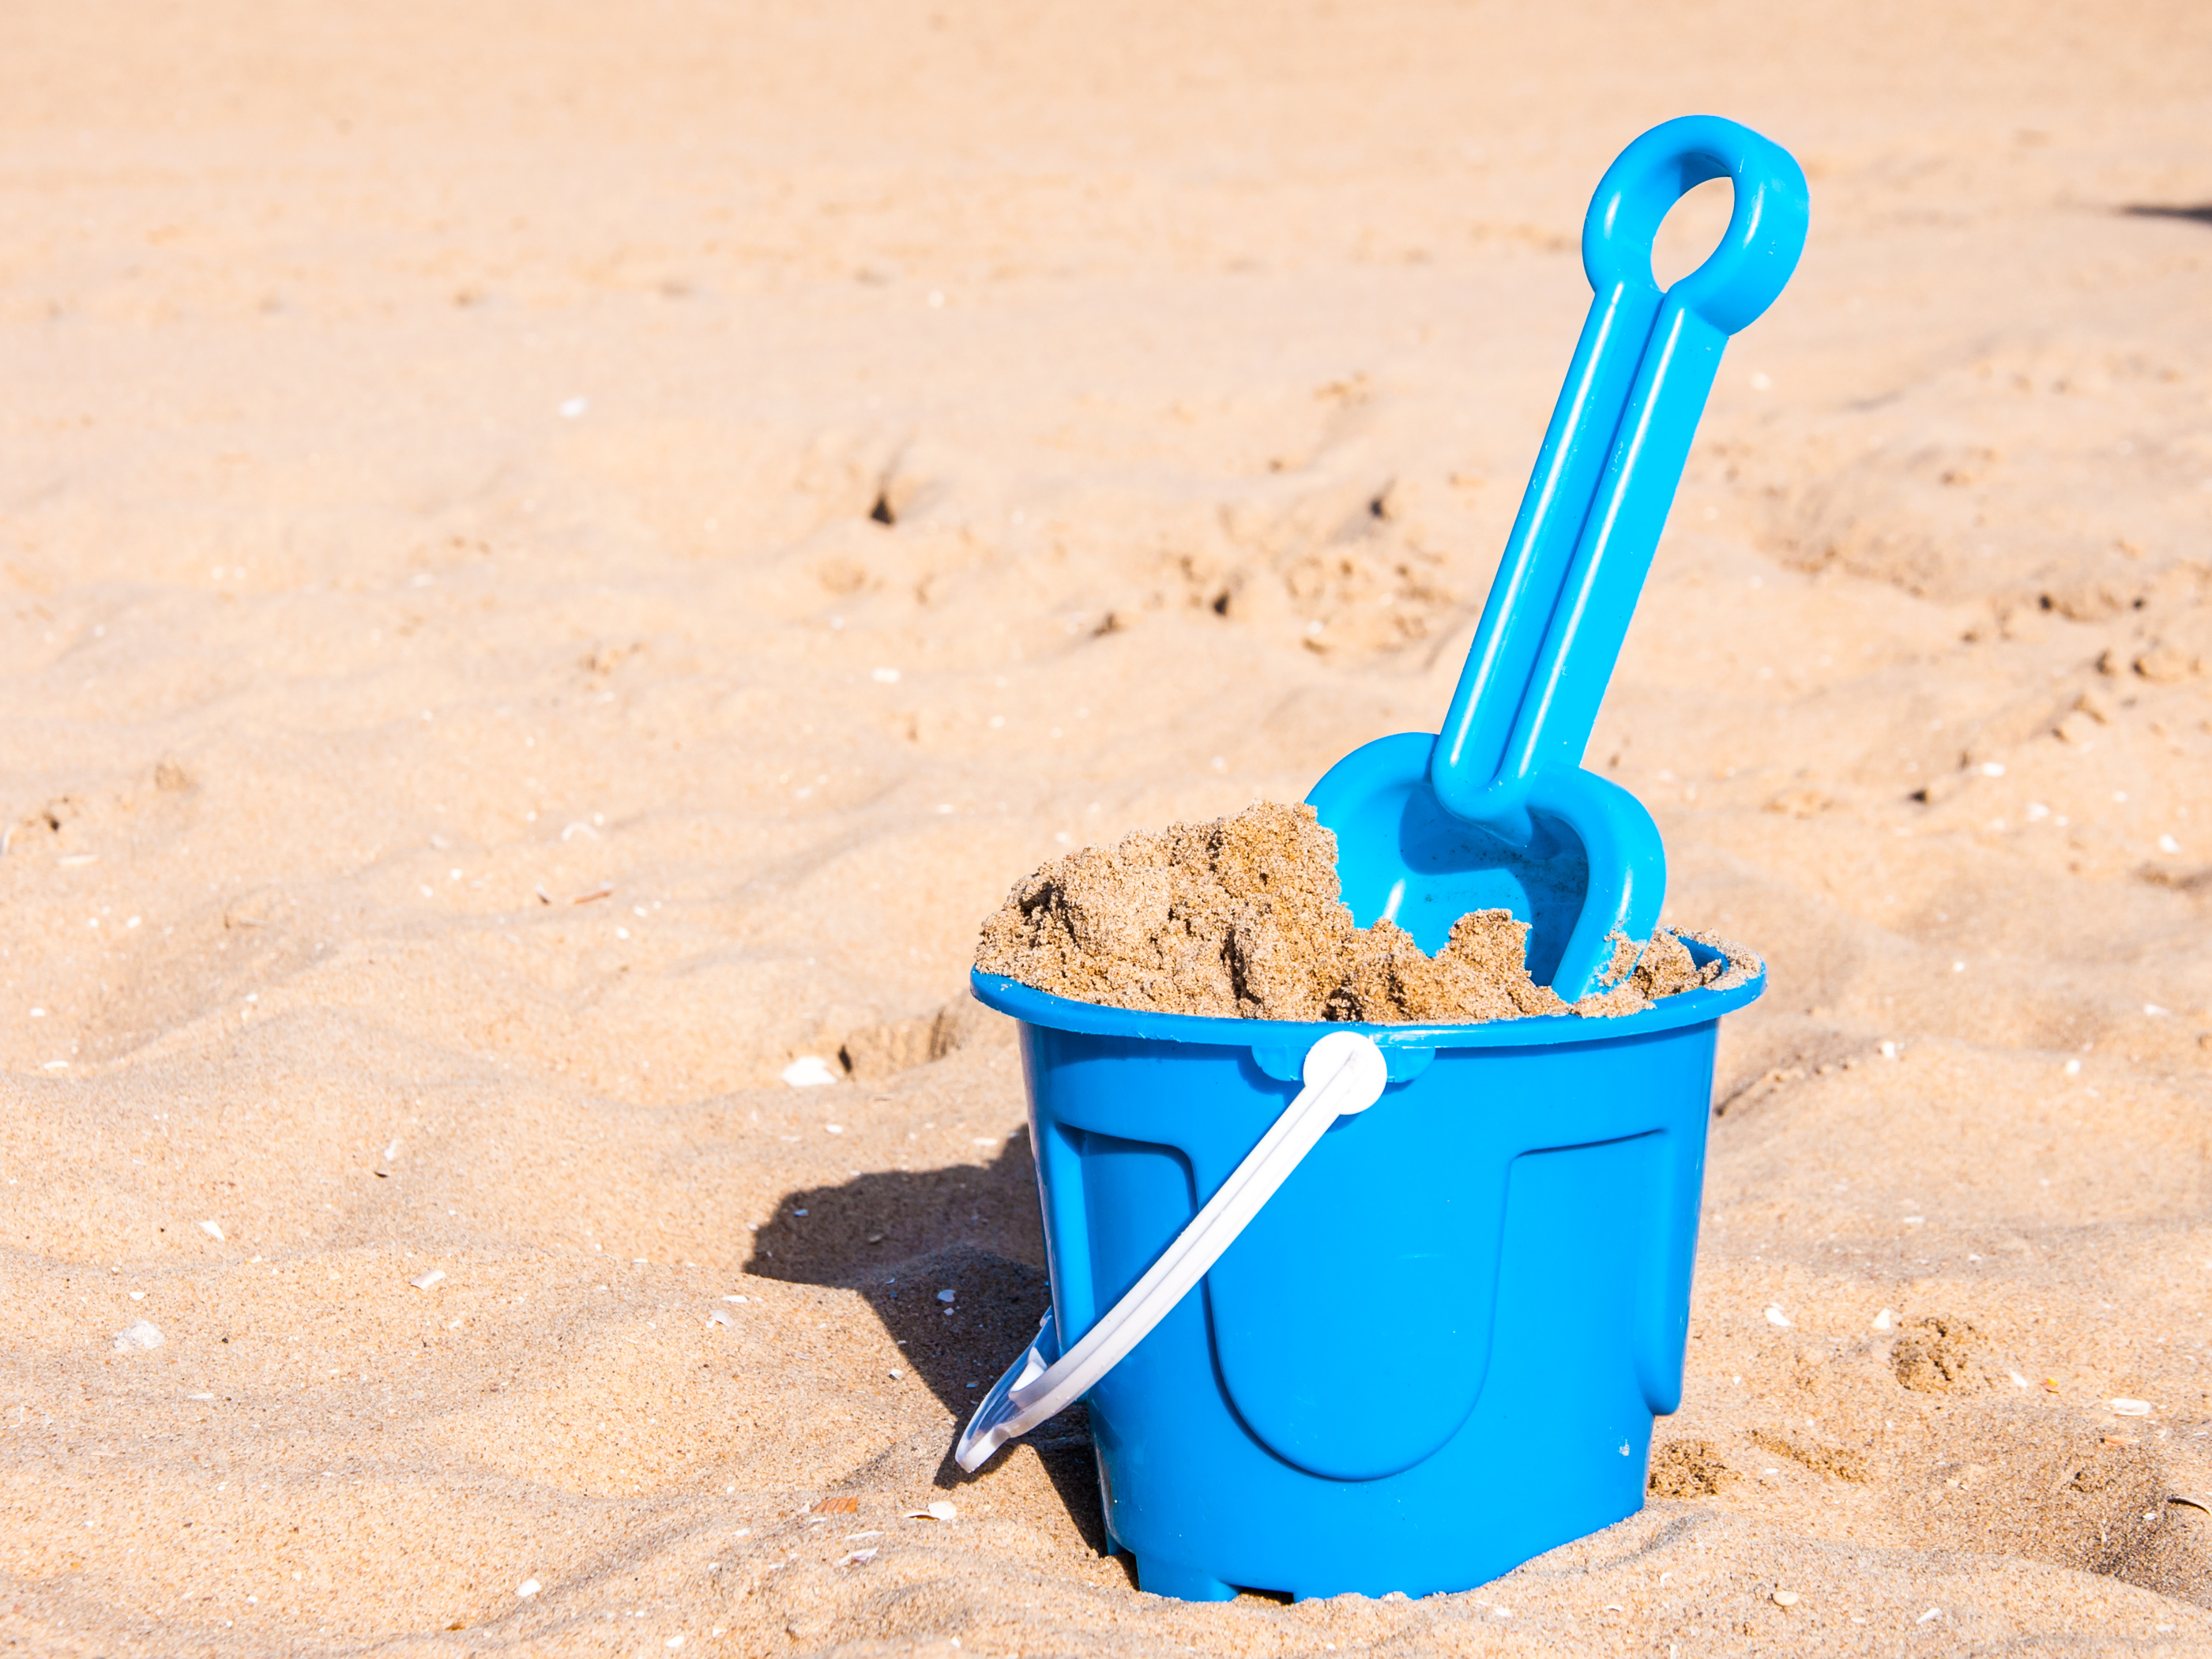 View of a basket and scoop at the beach, Basket, Season, Sand, Sandy, HQ Photo